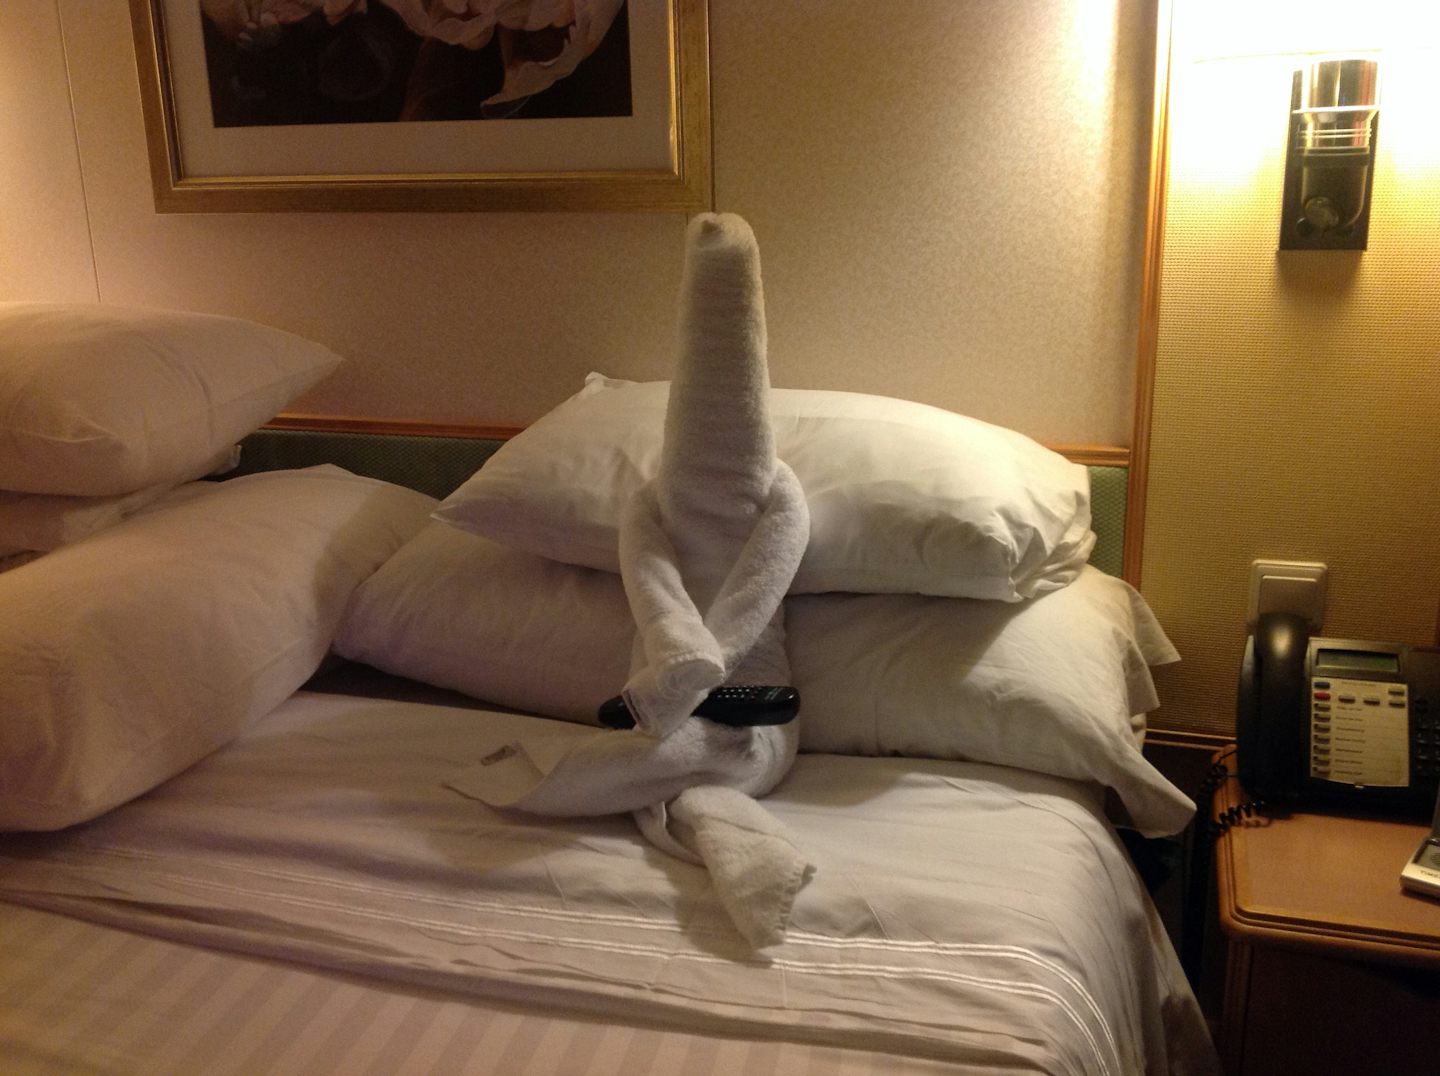 A towel person made by our wonderful cabin attendant.